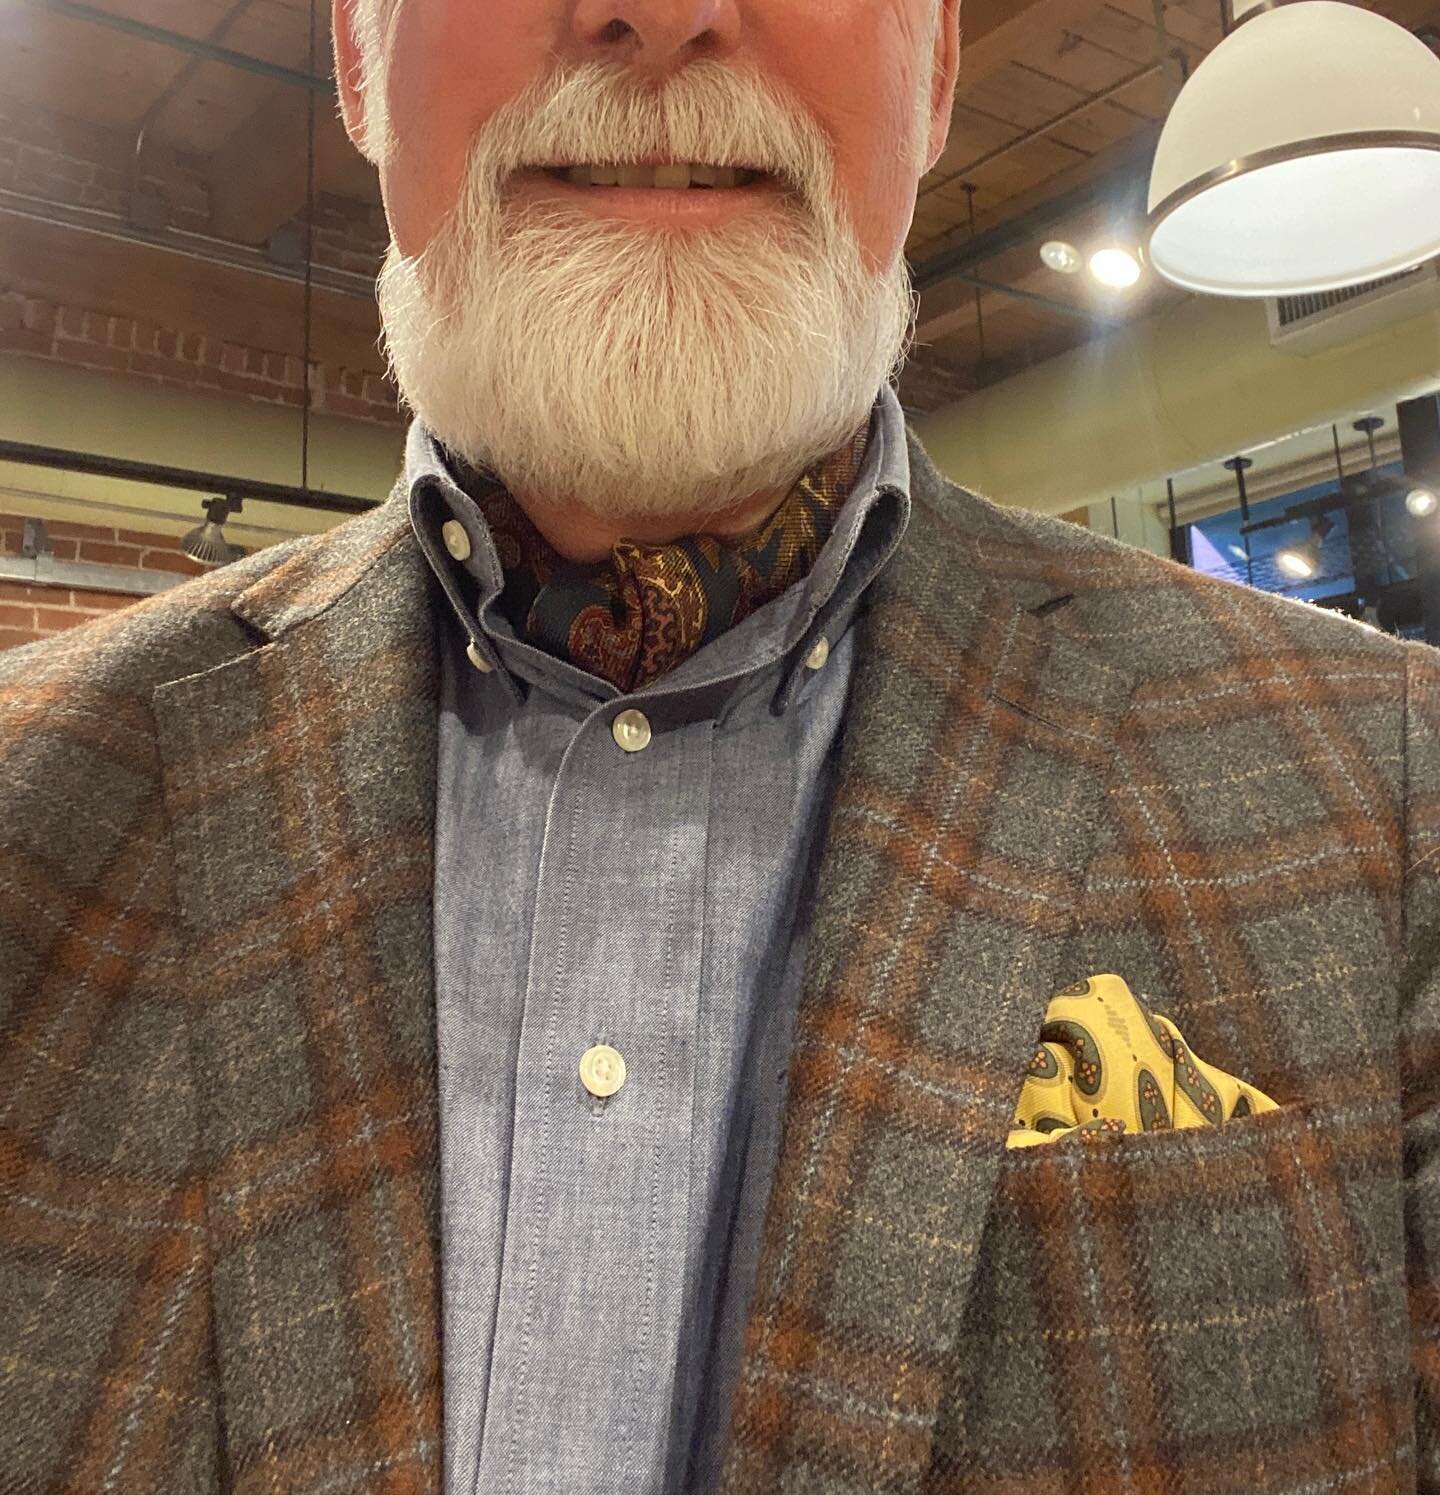 My Saturday Style!  @drinkwaterscambridge @samuelsohn @individualizedshirts_usa @dion__1967 @hiltl_official @paraboot_official @designerjosephabboud vintage pocket square #greatmensclothing